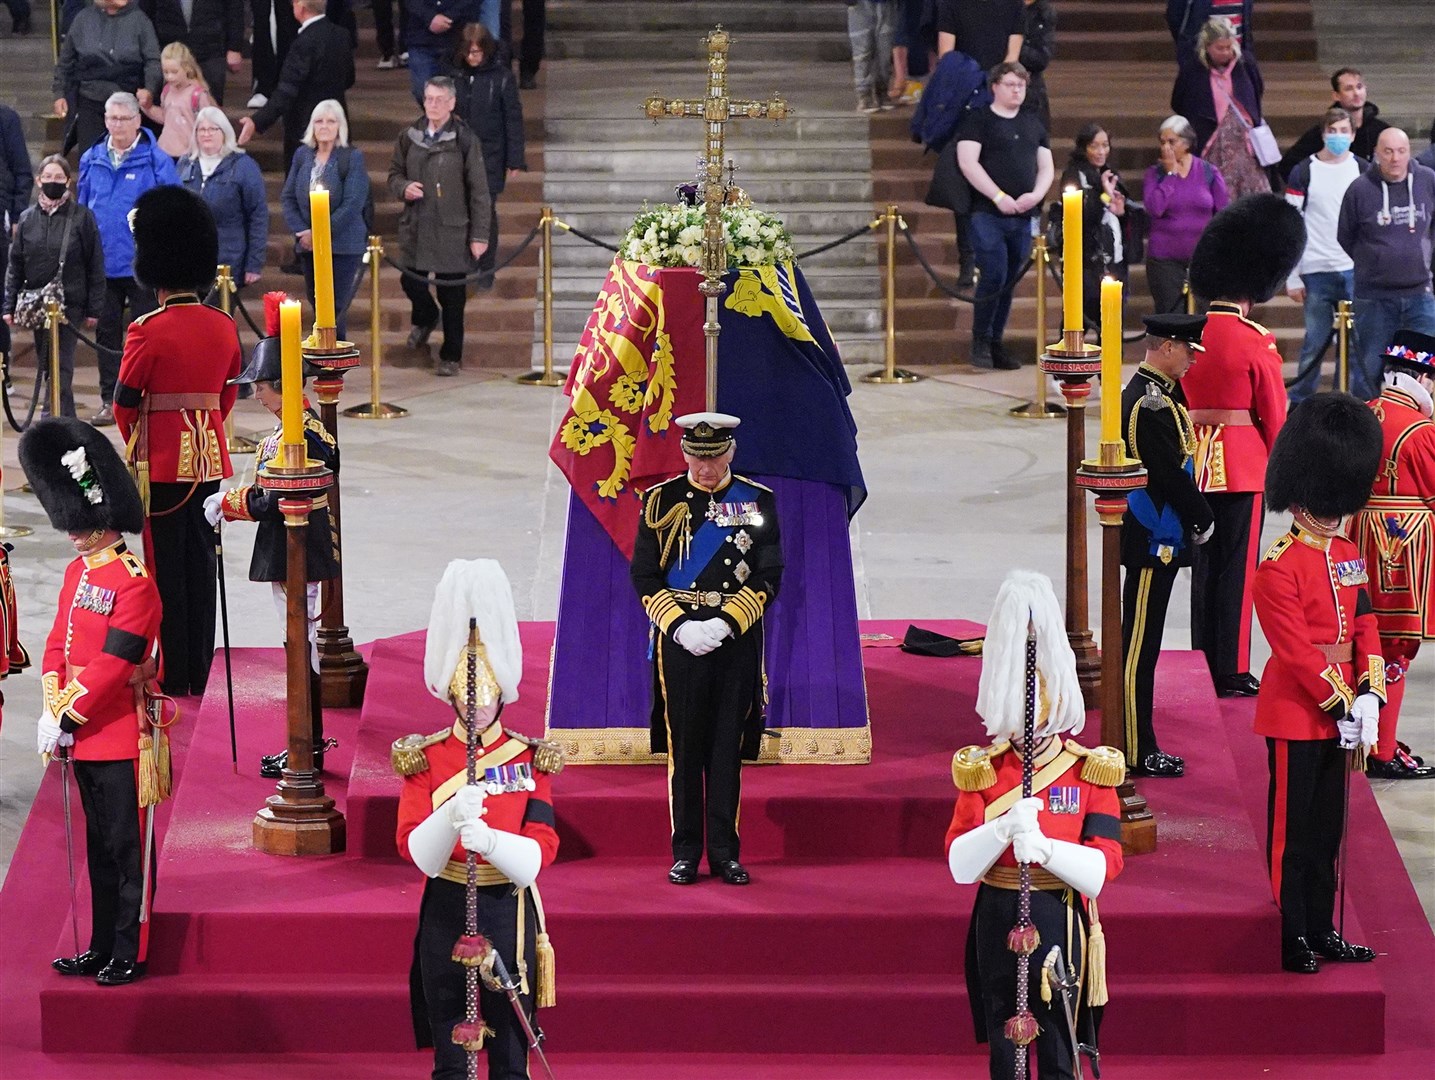 King Charles III, the Princess Royal, the Duke of York and the Earl of Wessex hold a vigil beside the coffin of their mother, Queen Elizabeth II, as it lies in state on the catafalque in Westminster Hall at the Palace of Westminster, London (Yui Mok/PA)